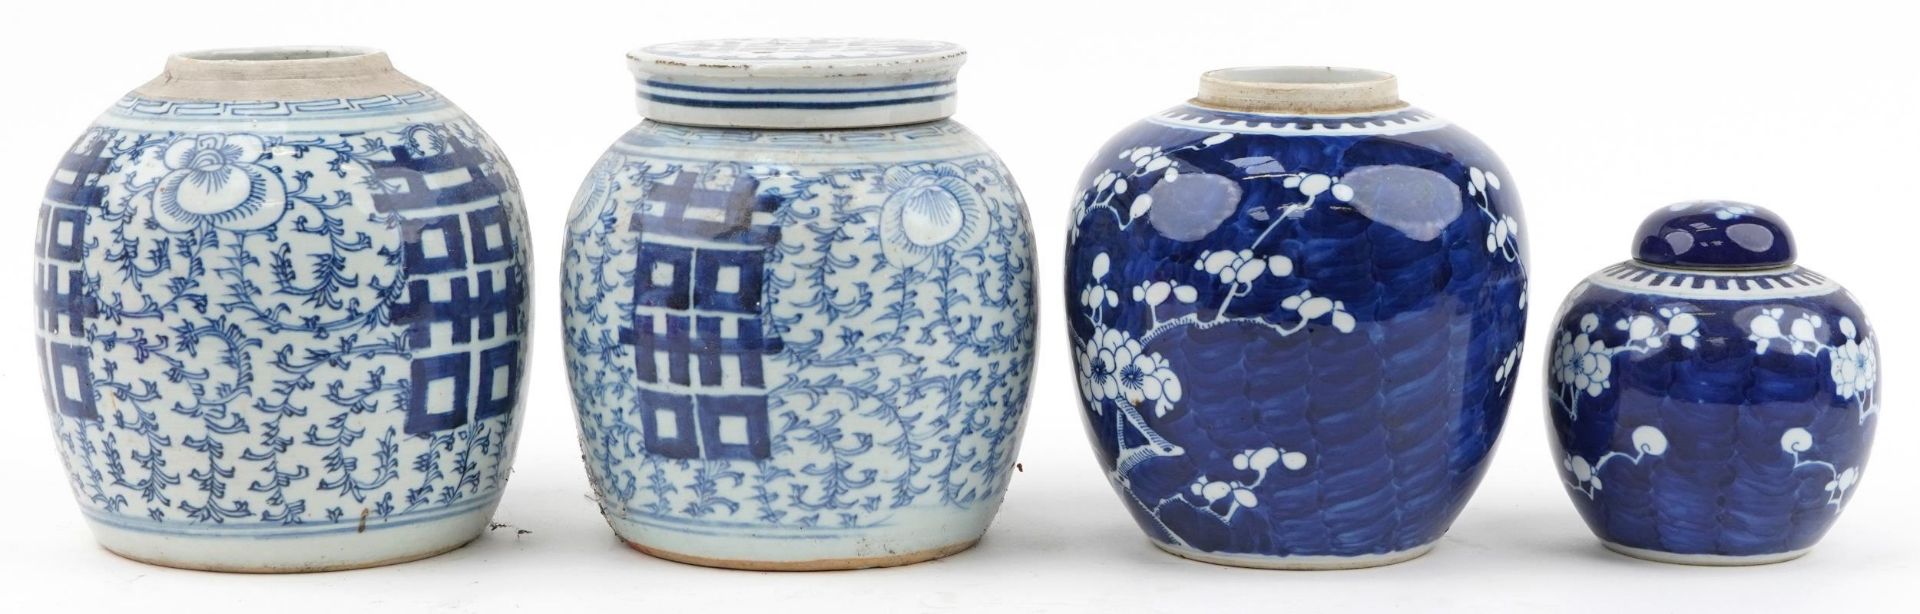 Four Chinese blue and white porcelain ginger jars including two hand painted in the prunus - Image 4 of 6